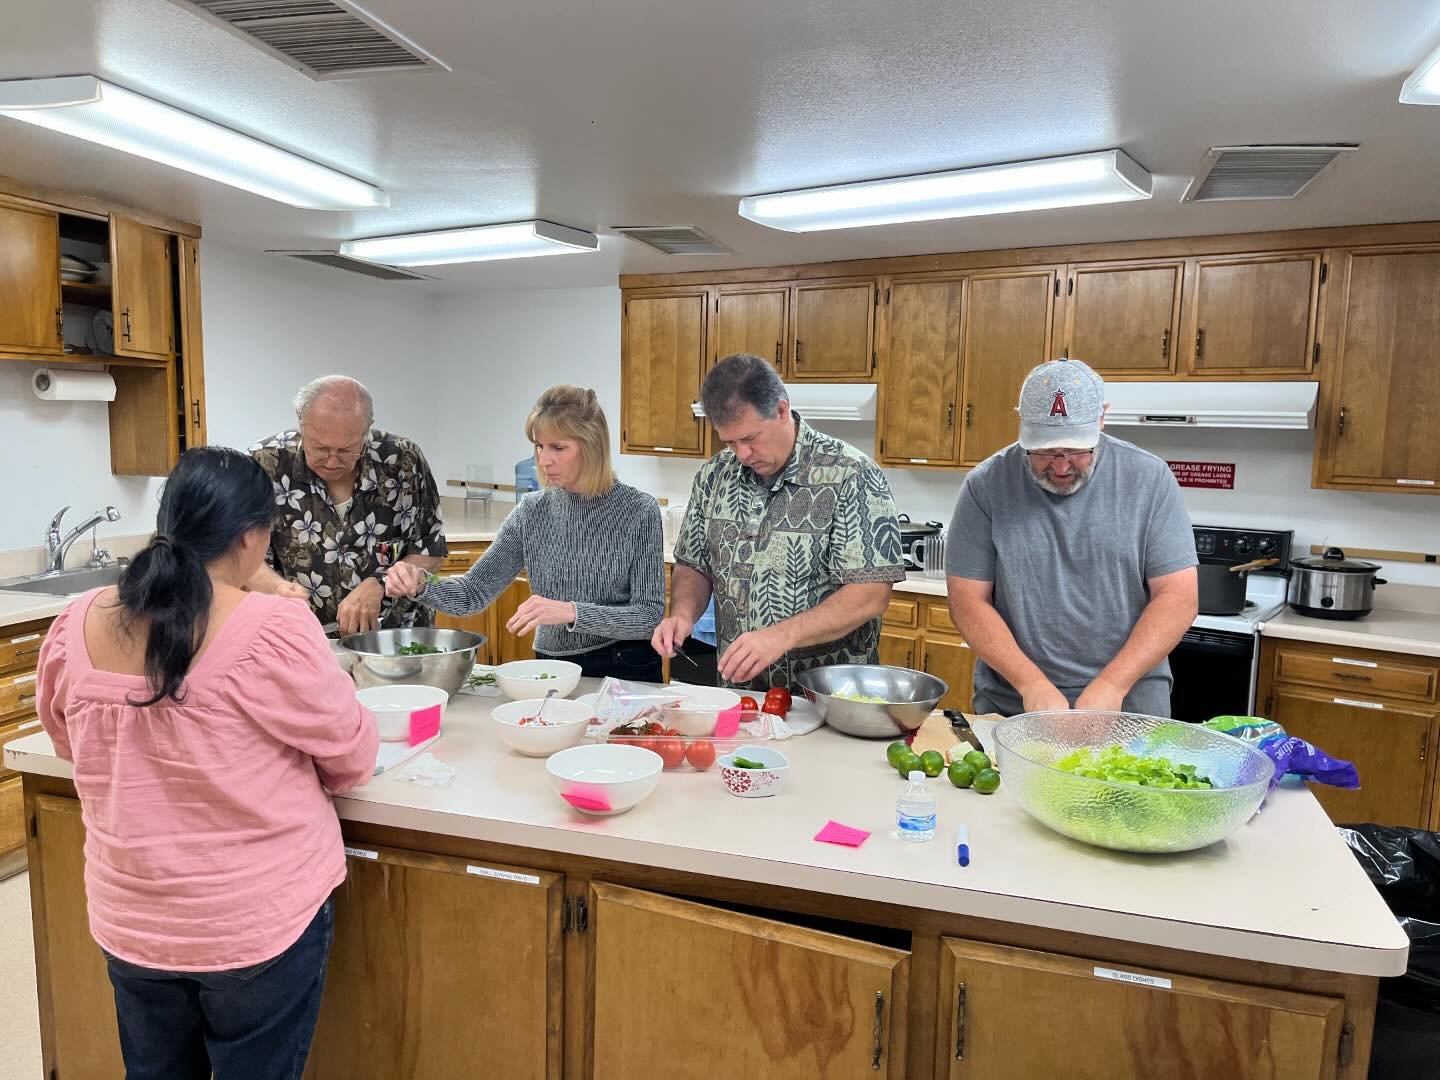 𝐂𝐨𝐦𝐛𝐢𝐧𝐞𝐝 𝐒𝐞𝐫𝐯𝐢𝐜𝐞 𝐚𝐭 𝟏𝟎𝐚𝐦

We are so thankful for all the volunteers that came in this morning to prepare for our lunch this afternoon! Our combined service will be at 10am and lunch (tacos) will follow the service! We hope to see